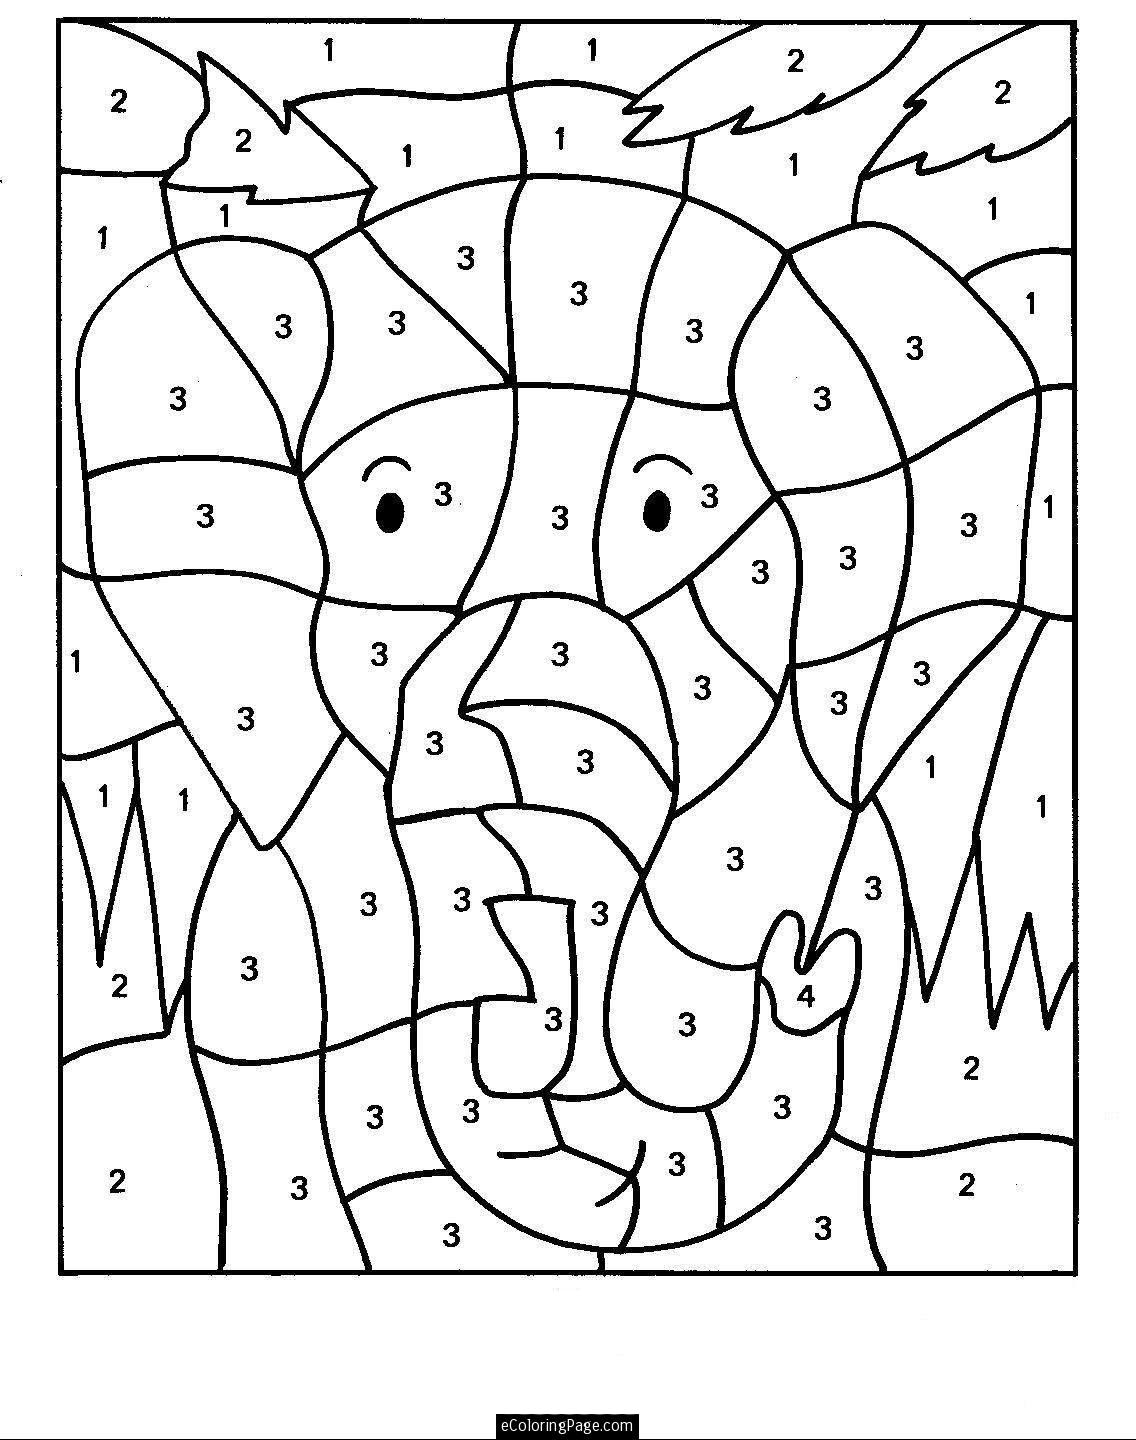 Printable Color by Number Coloring Pages Image